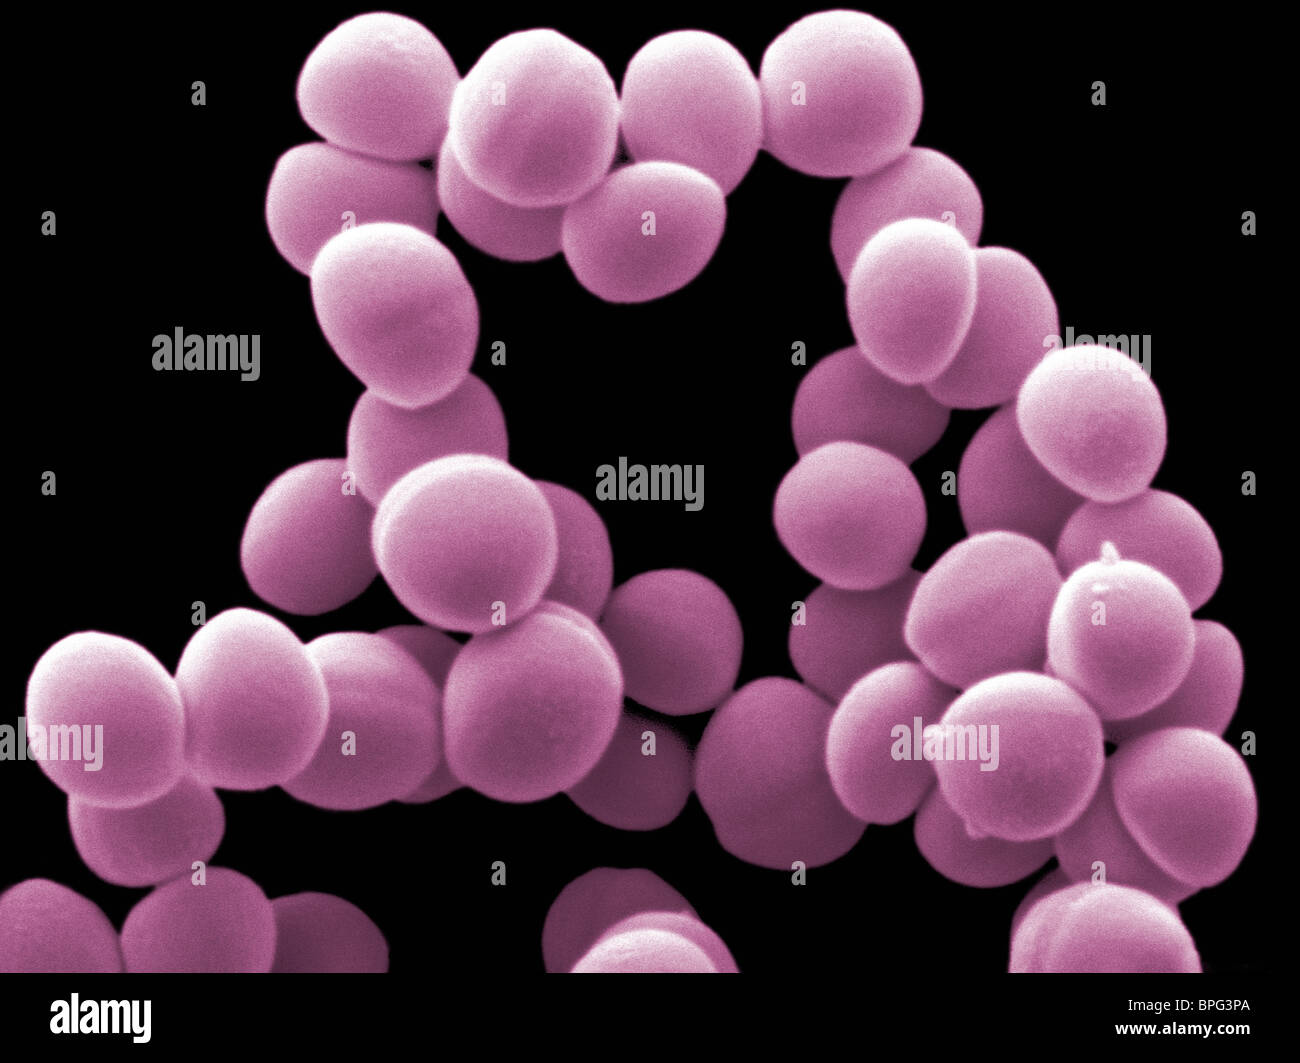 Staphylococcus epidermidis is a common member of human skin and mucous membranes. Stock Photo